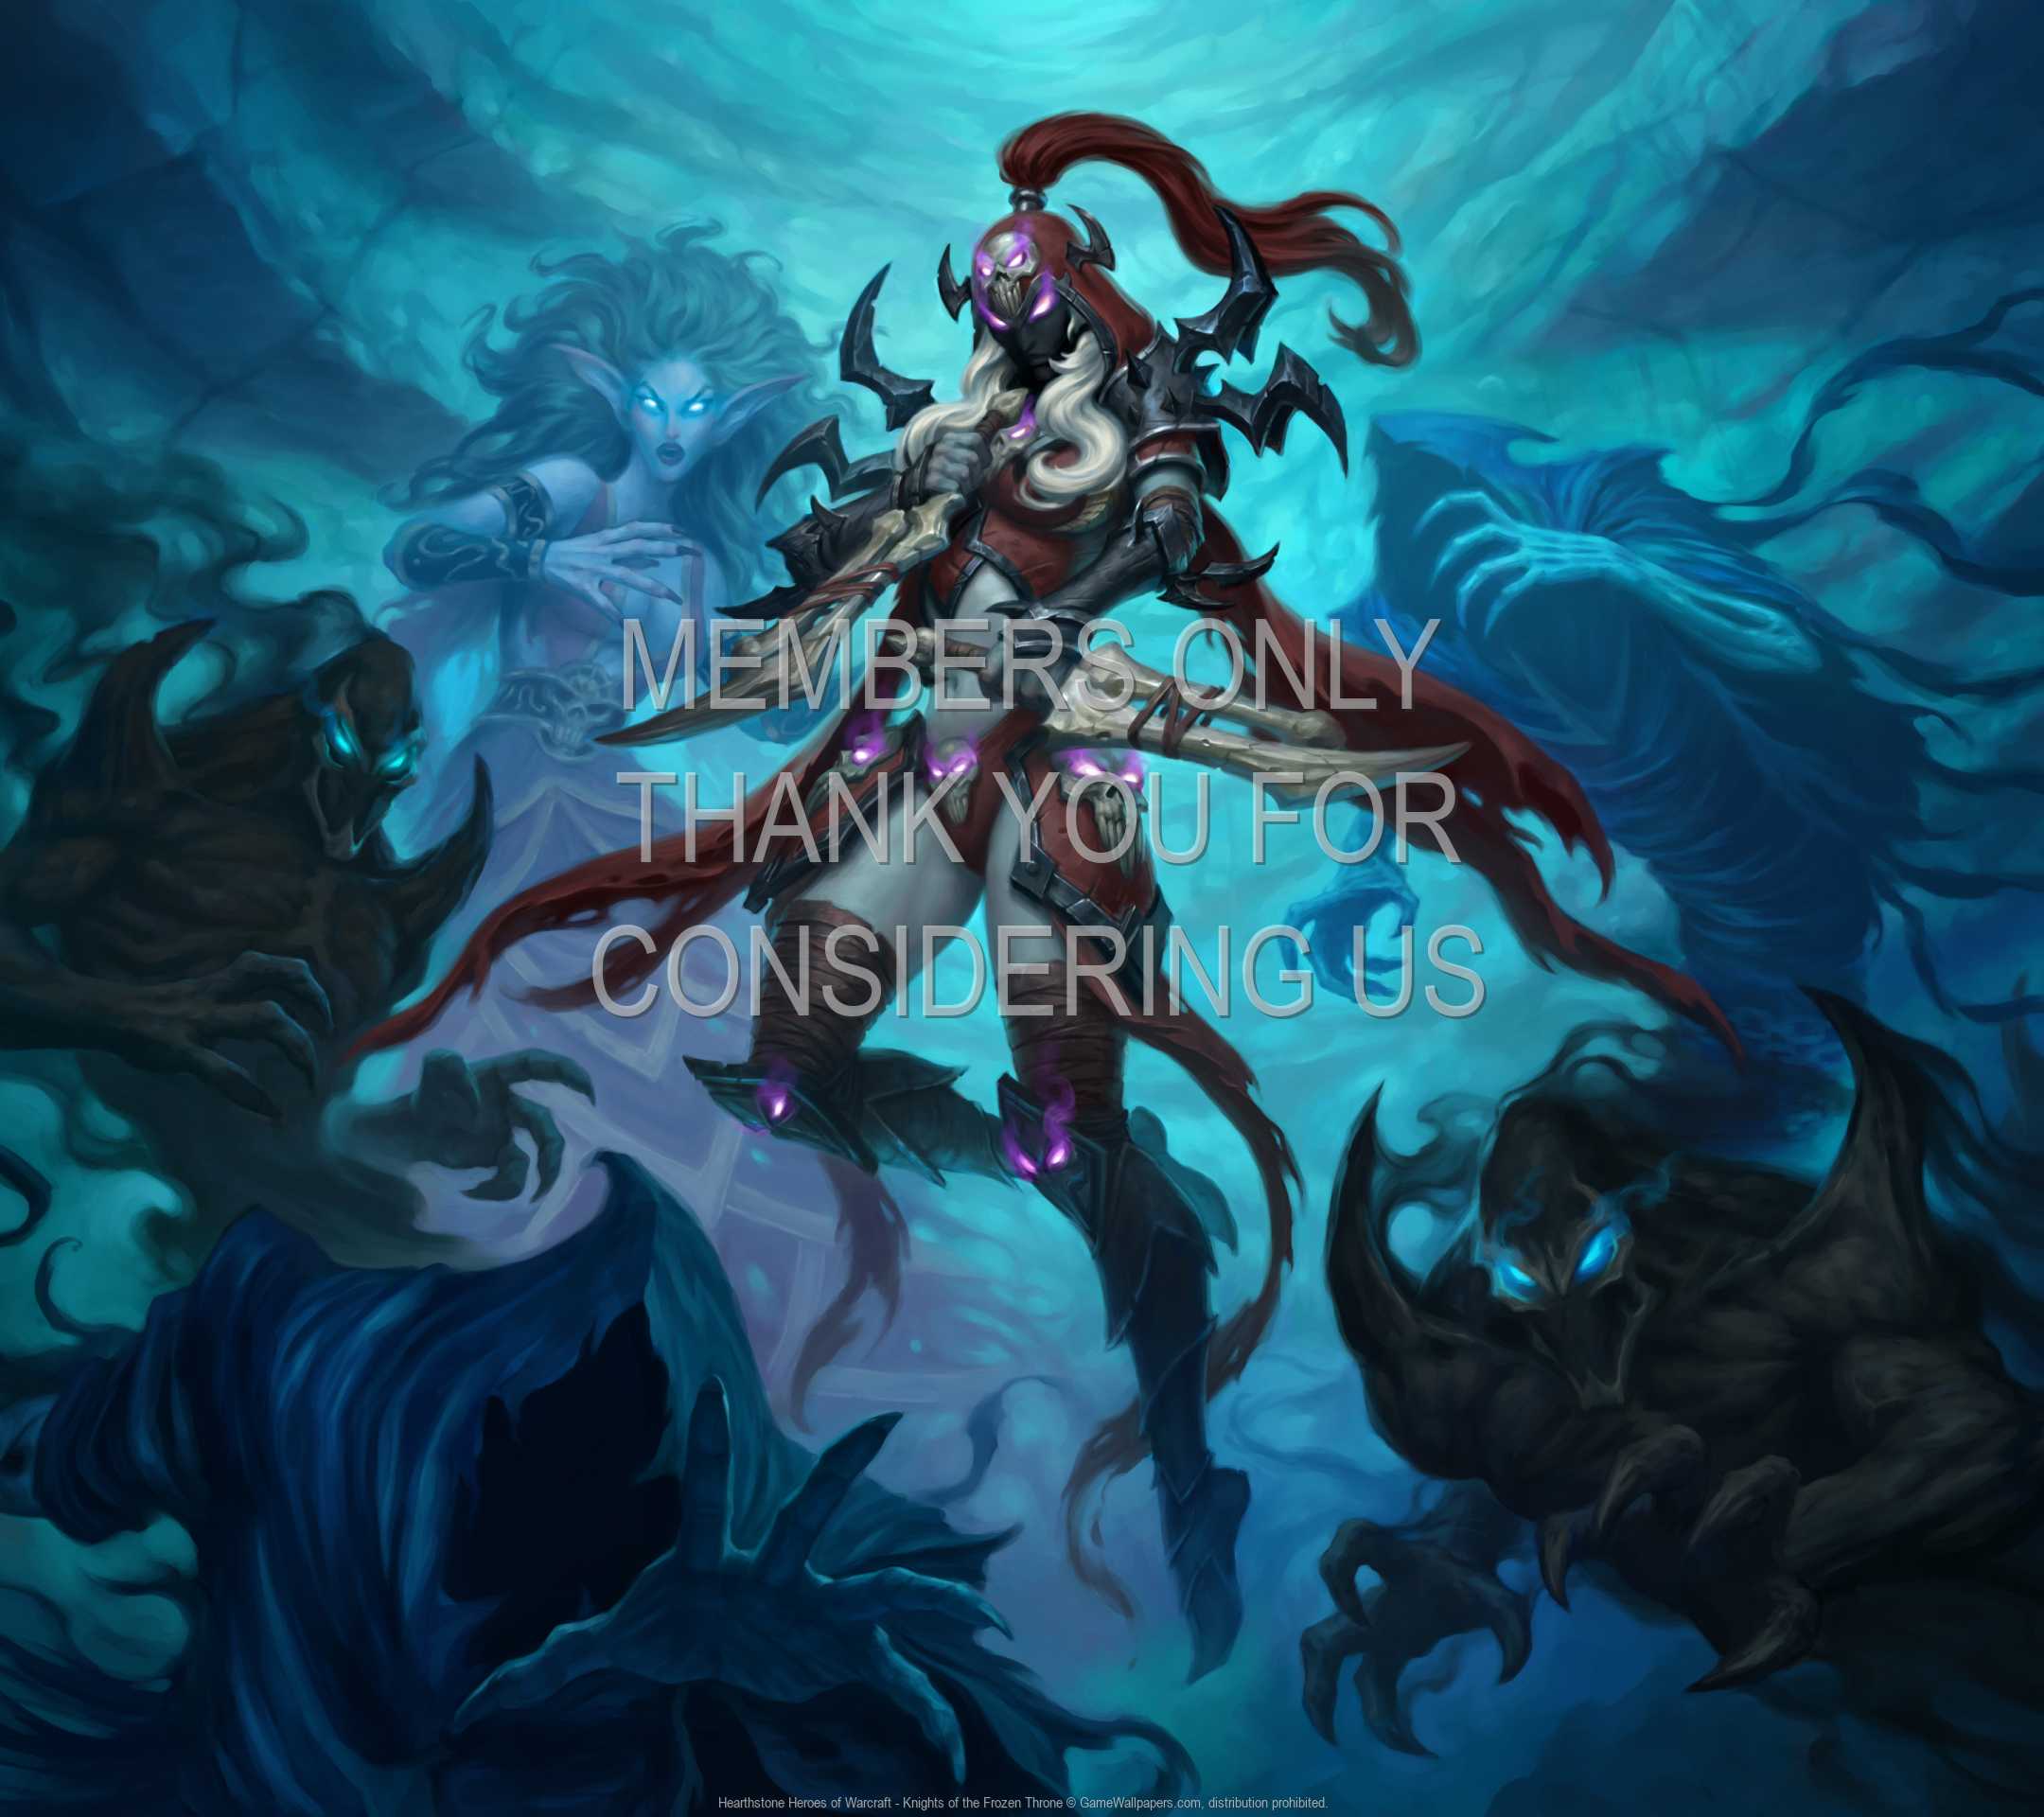 Hearthstone: Heroes of Warcraft - Knights of the Frozen Throne wallpaper 05  1080p Horizontal